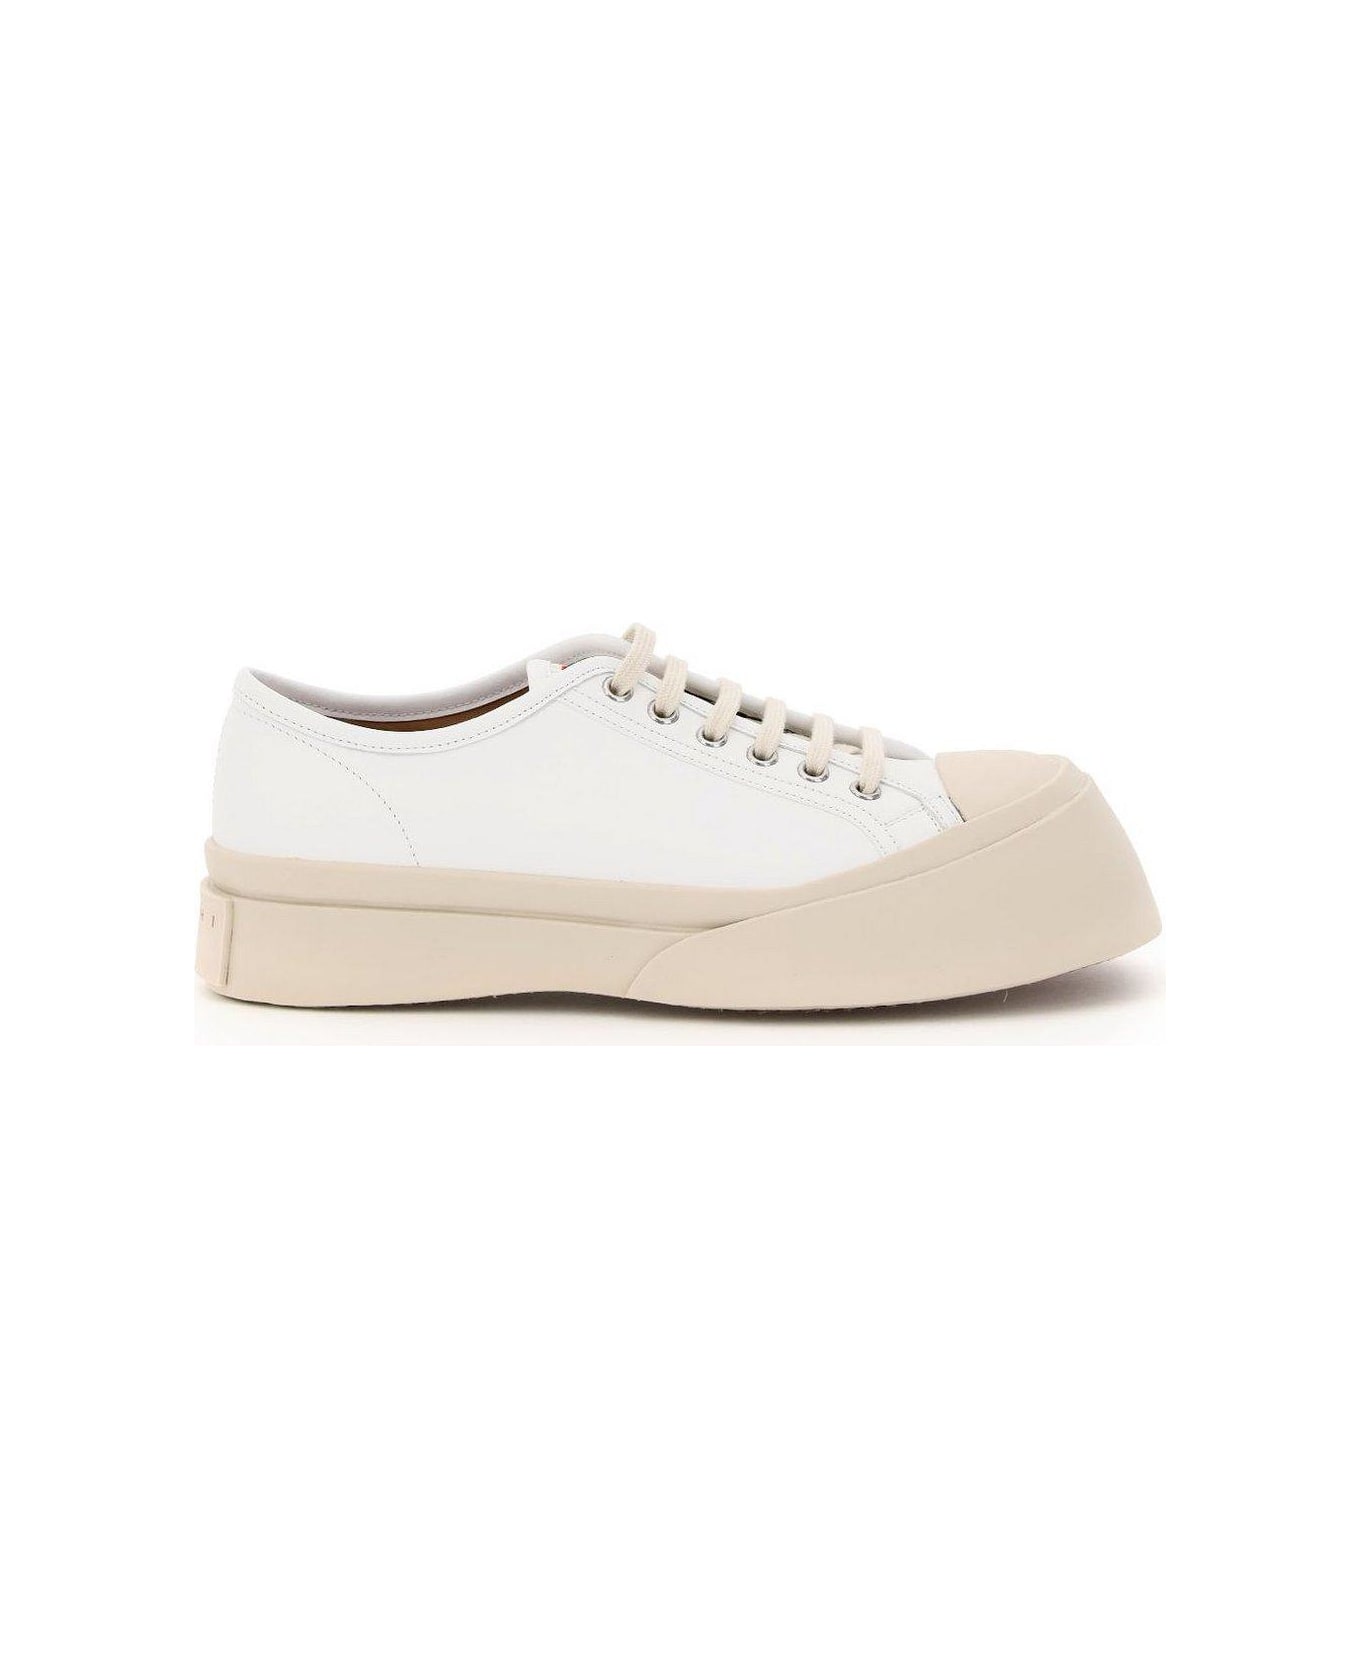 Marni Pablo Chunky Sole Sneakers - WHITE